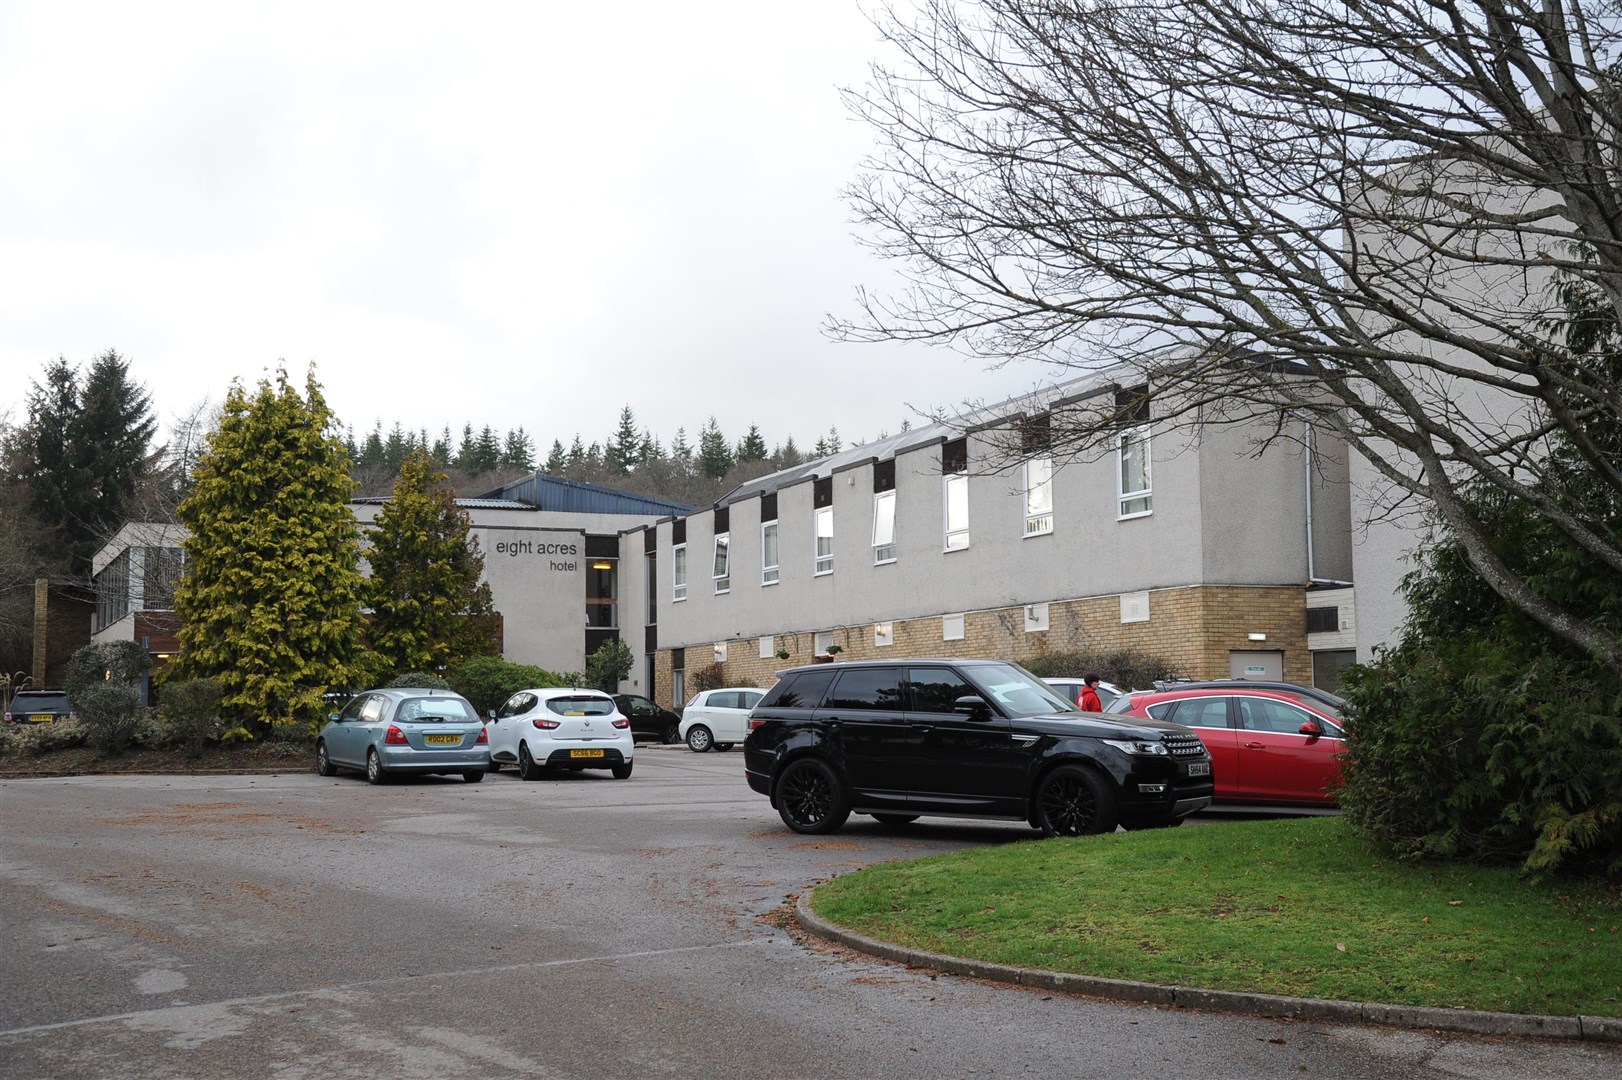 The Eight Acres Hotel in Elgin where 38 asylum seekers are currently being housed.